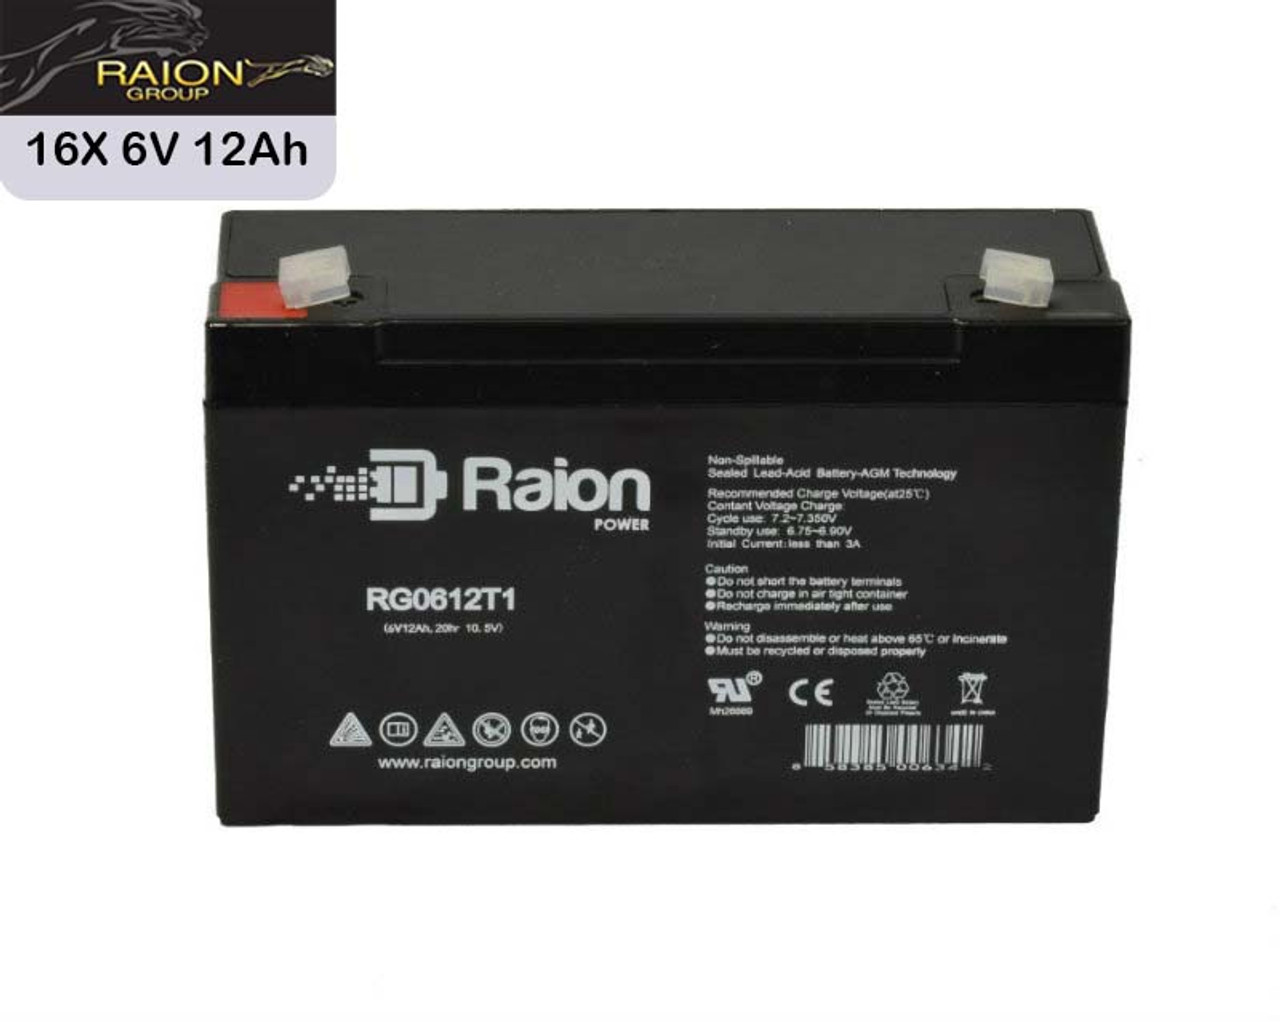 HP Compaq 295462-001 Replacement 6V 12Ah RG0612T1 UPS Battery - 16 Pack